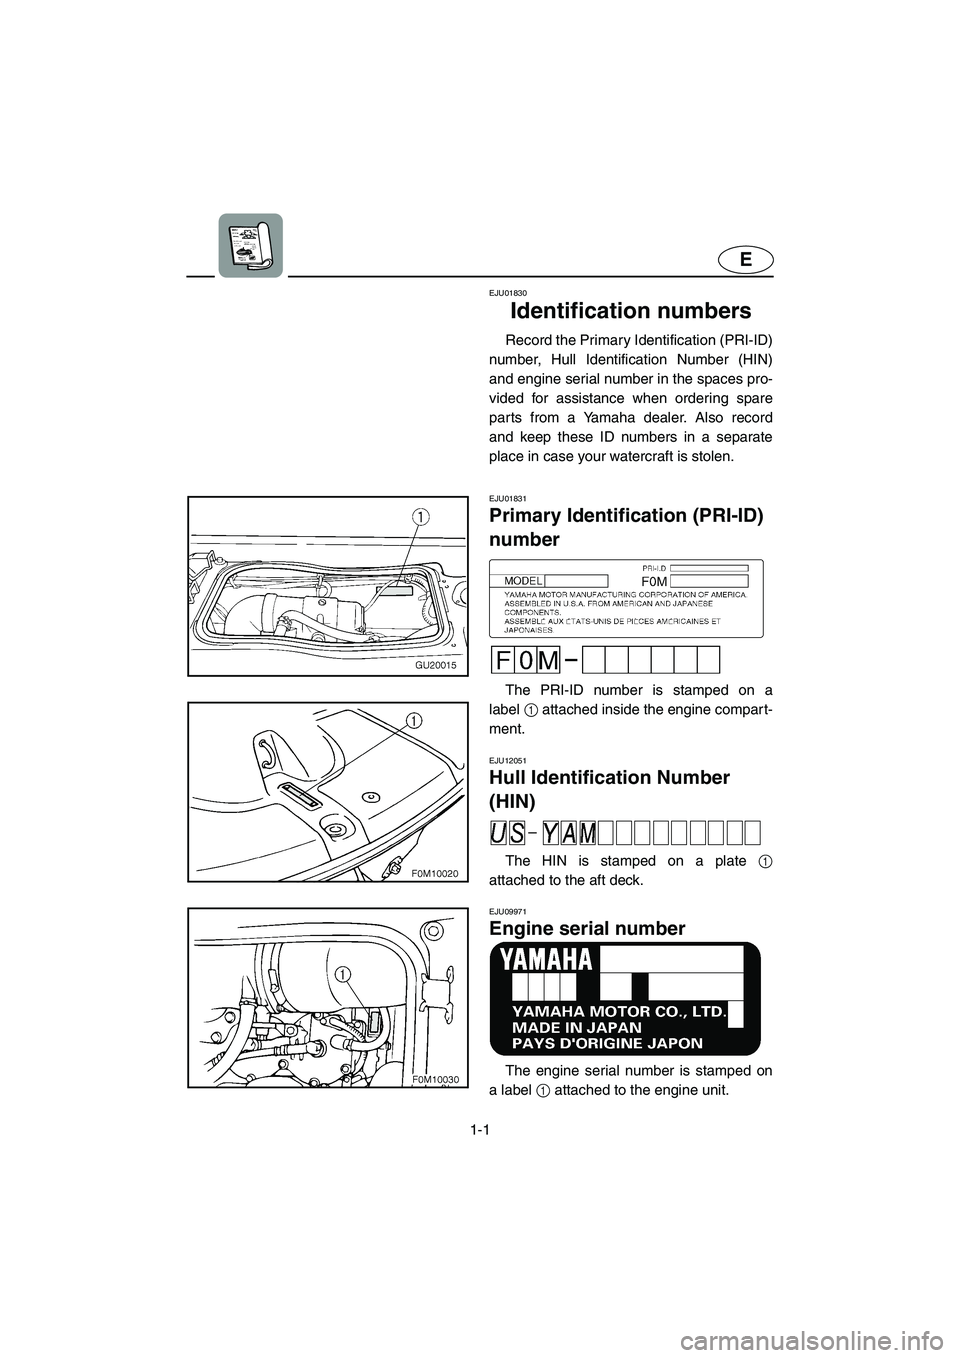 YAMAHA XL 700 2005  Owners Manual 1-1
E
EJU01830
Identification numbers 
Record the Primary Identification (PRI-ID)
number, Hull Identification Number (HIN)
and engine serial number in the spaces pro-
vided for assistance when orderin